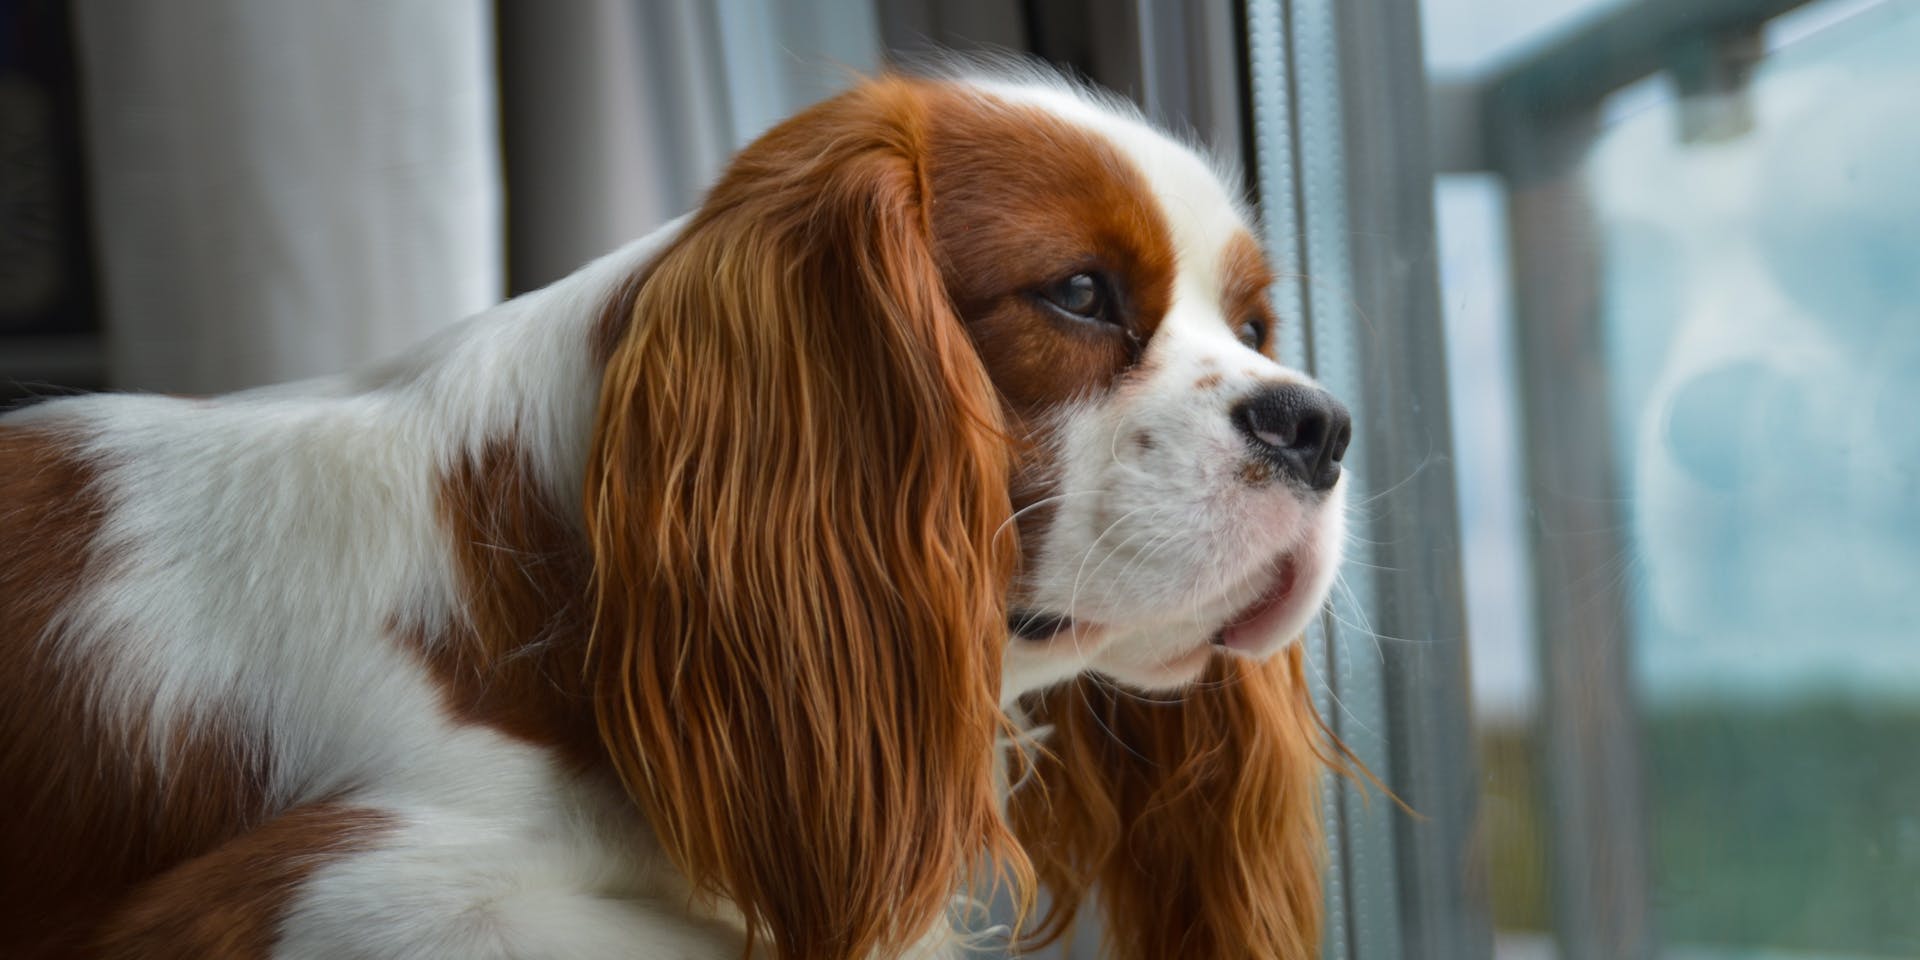 British dog breed looking out of a window.